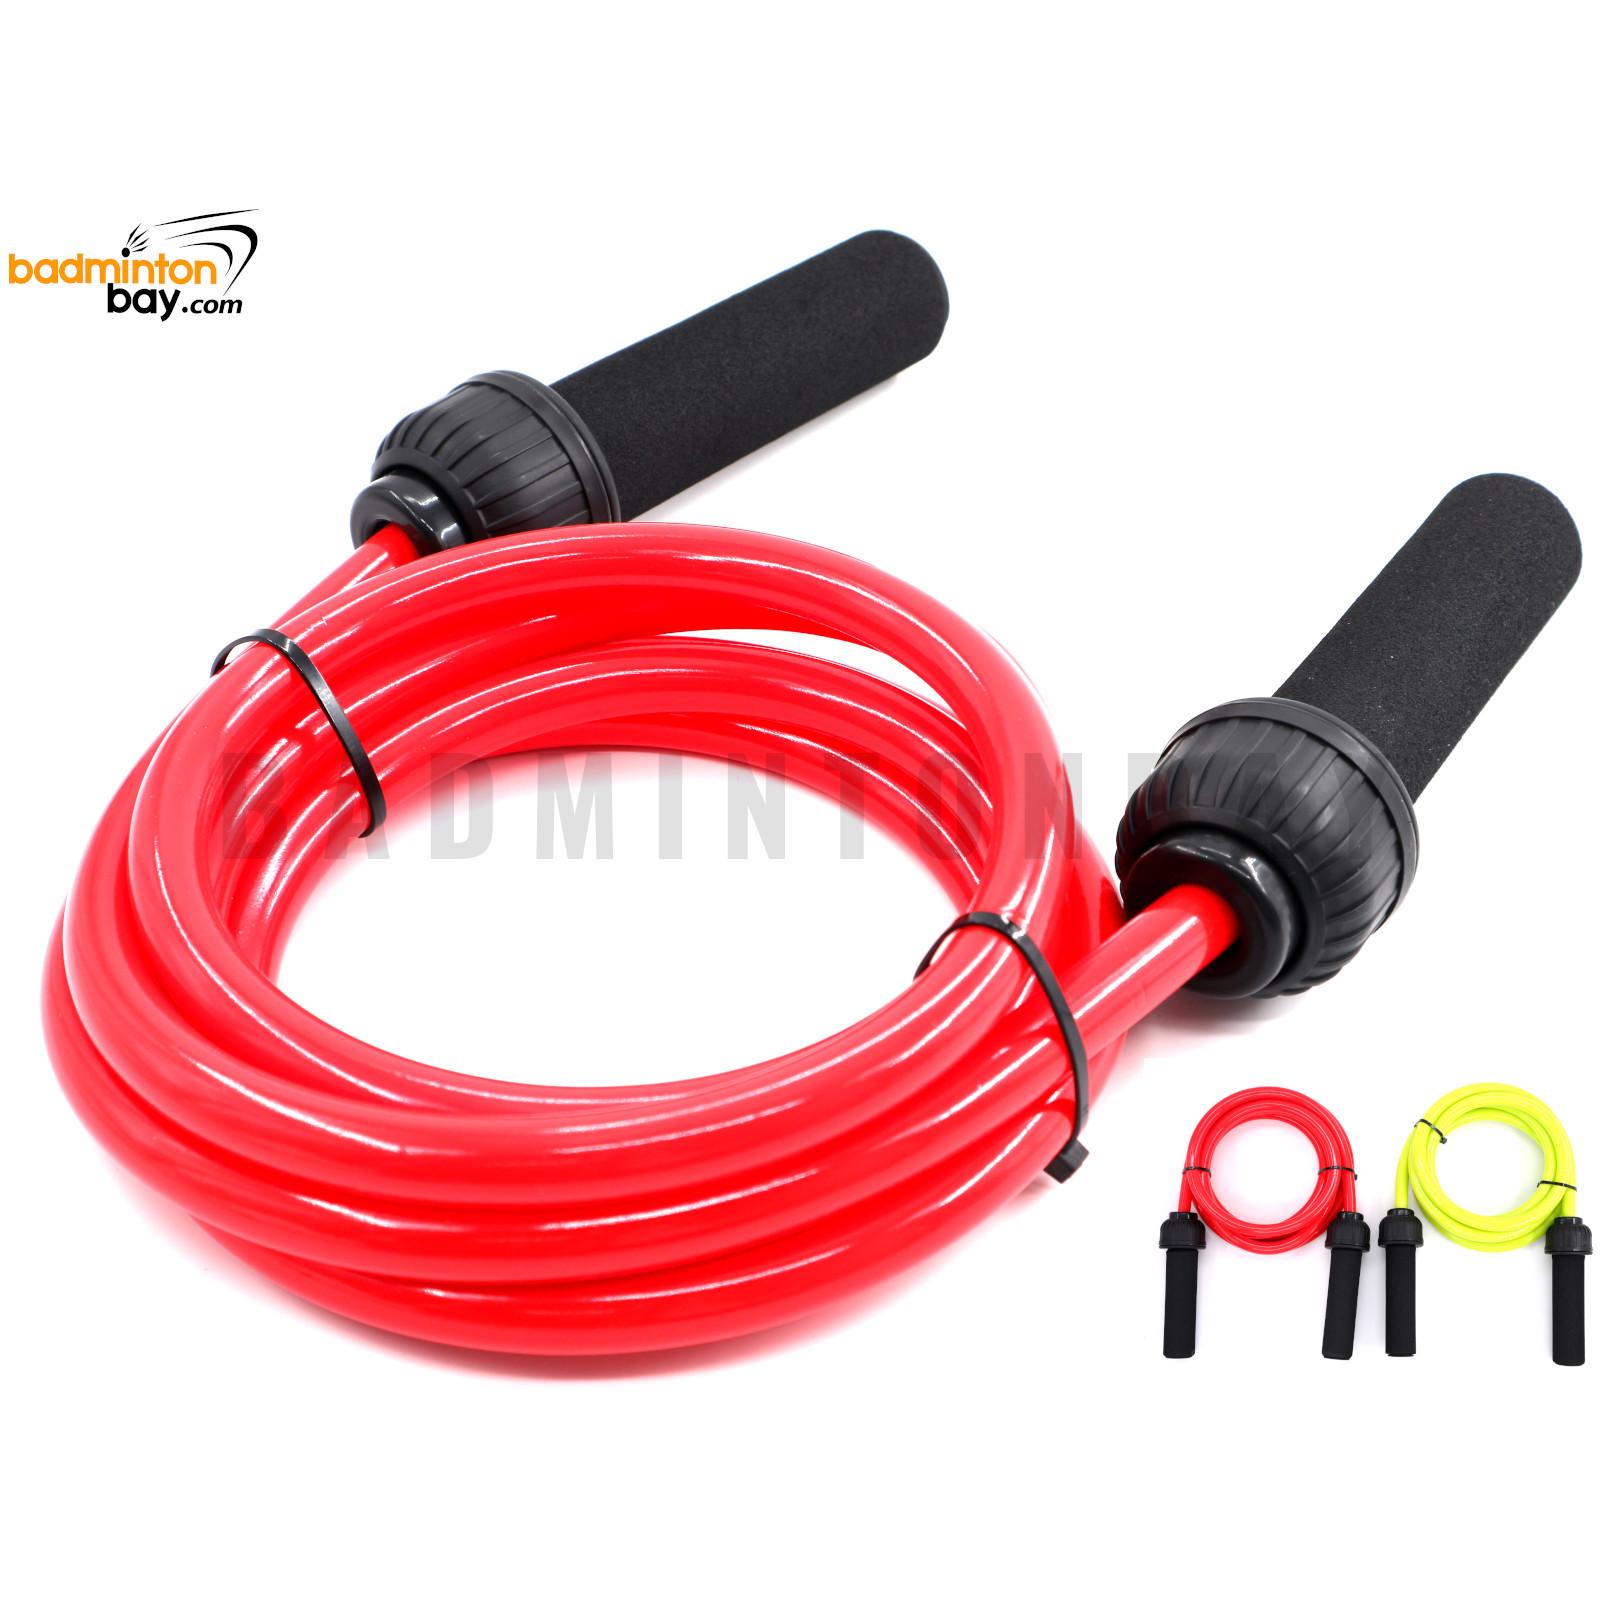 Crossfit Heavy Skipping Rope 700g Weighted Foam Handle Bold